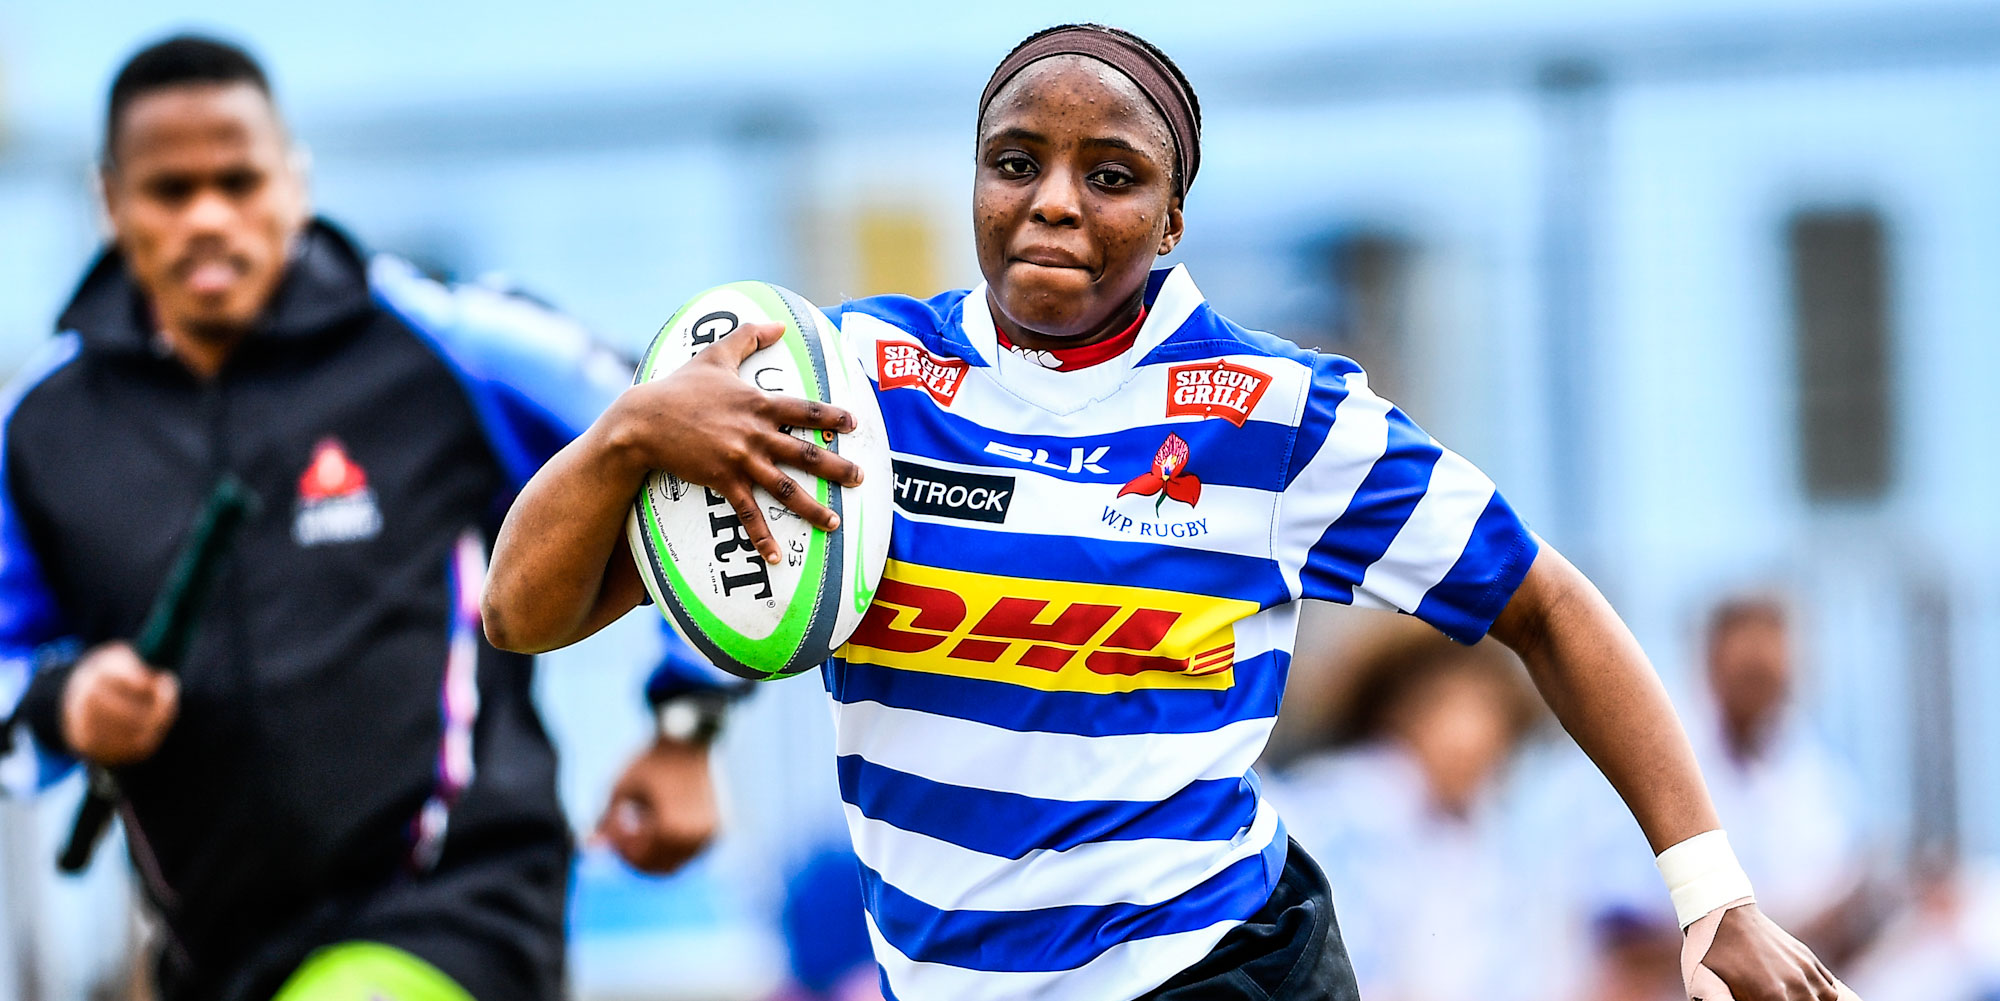 Asiphe Mayaba finished the league phase of the competition as the top try scorer.